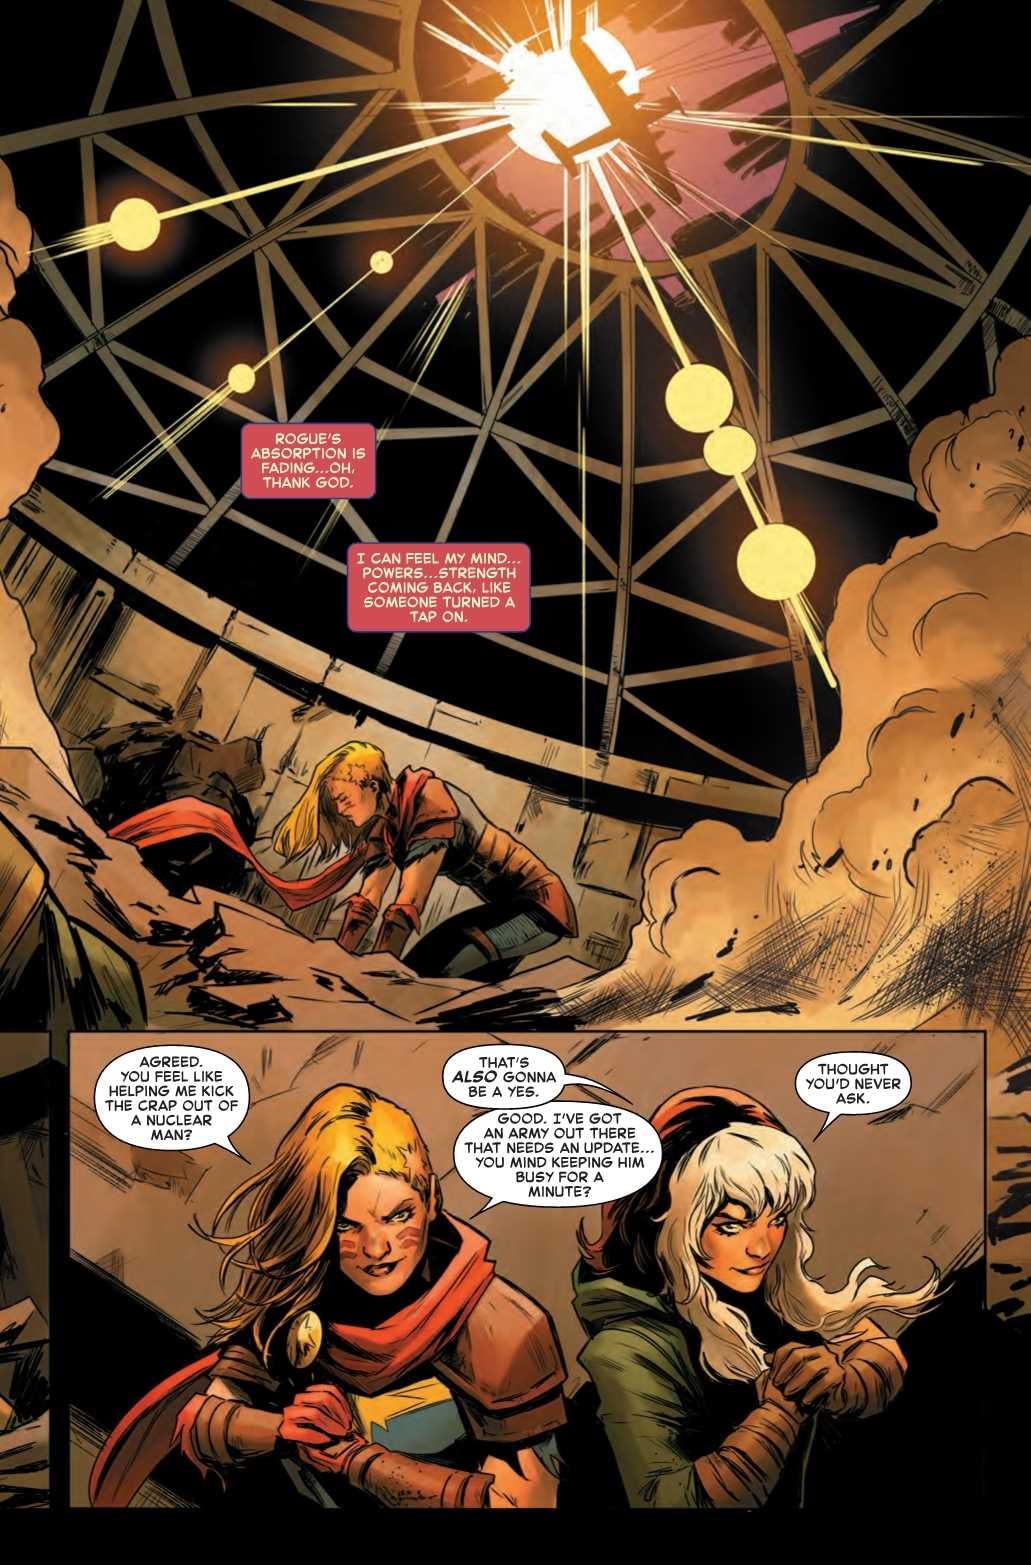 Looks Like Another Wedding is Canceled in This Captain Marvel #5 Preview